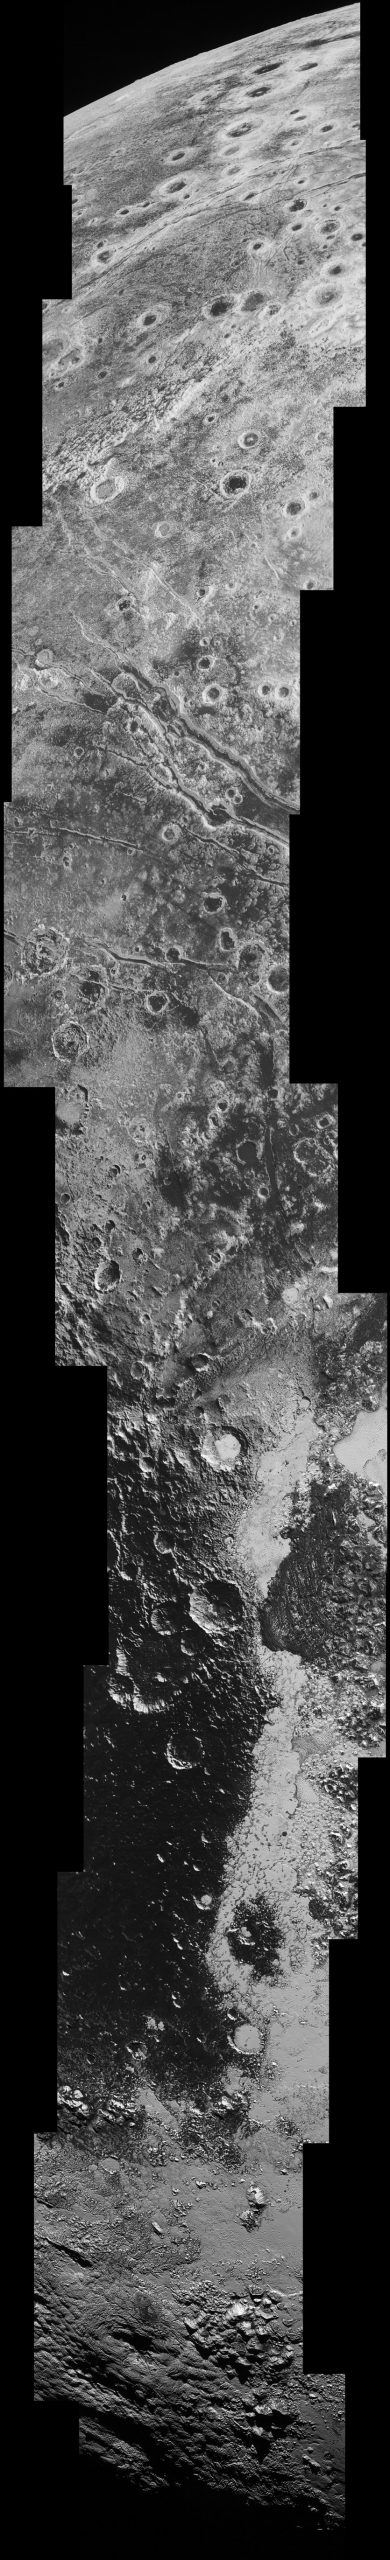 Pluto high res slice scaled